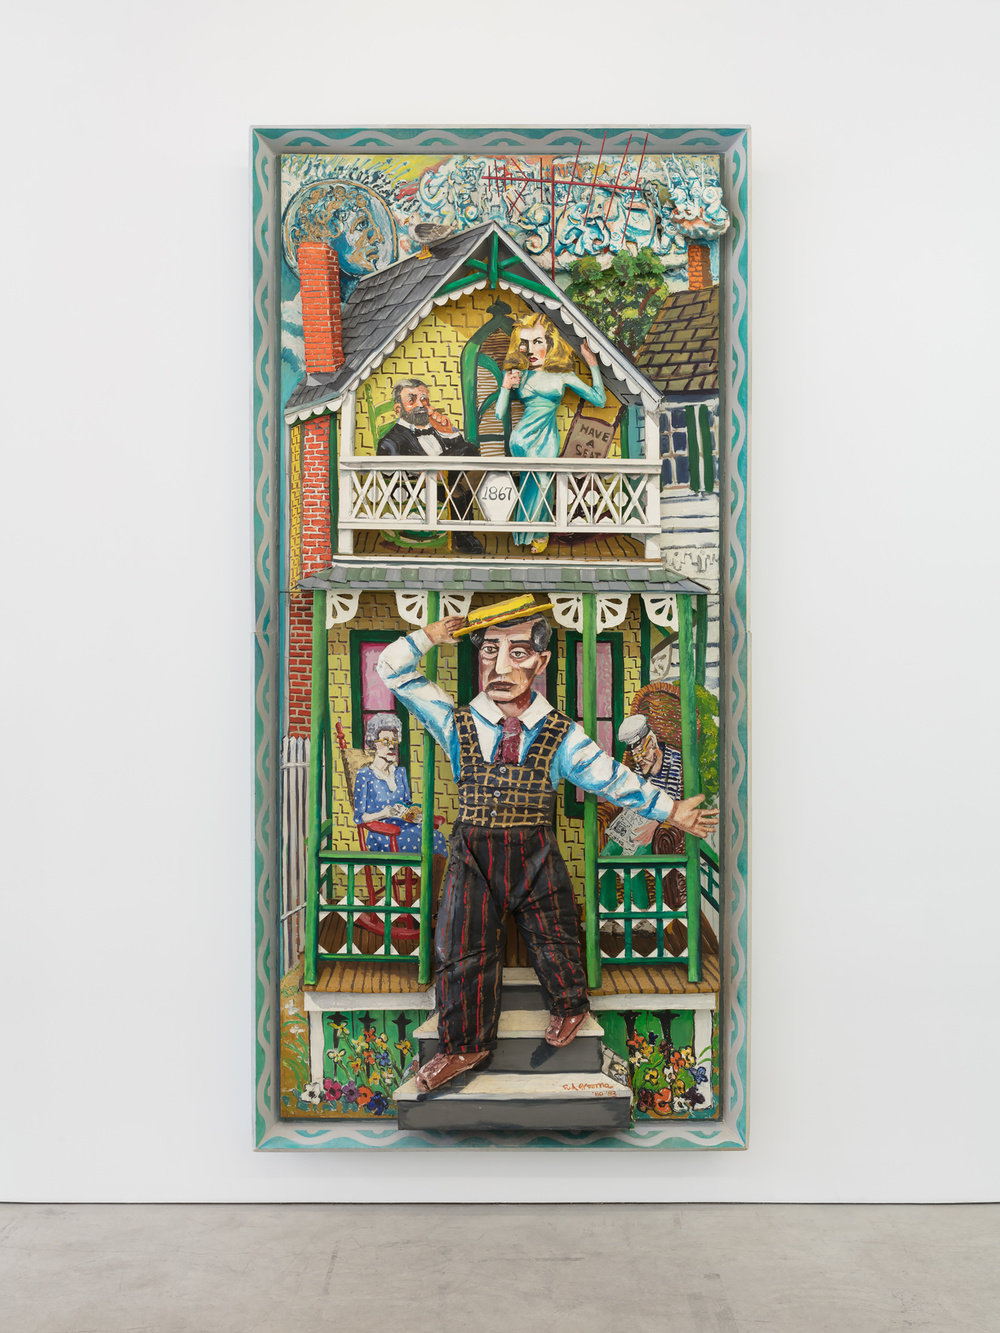 Grooms, buster keaton and friends, 1980 83, mixed media construction, 139 1 4 x 68 1 8 x 17 in., 353.7 x 173.04 x 43.18 cm, non 24.848 pierre le hors